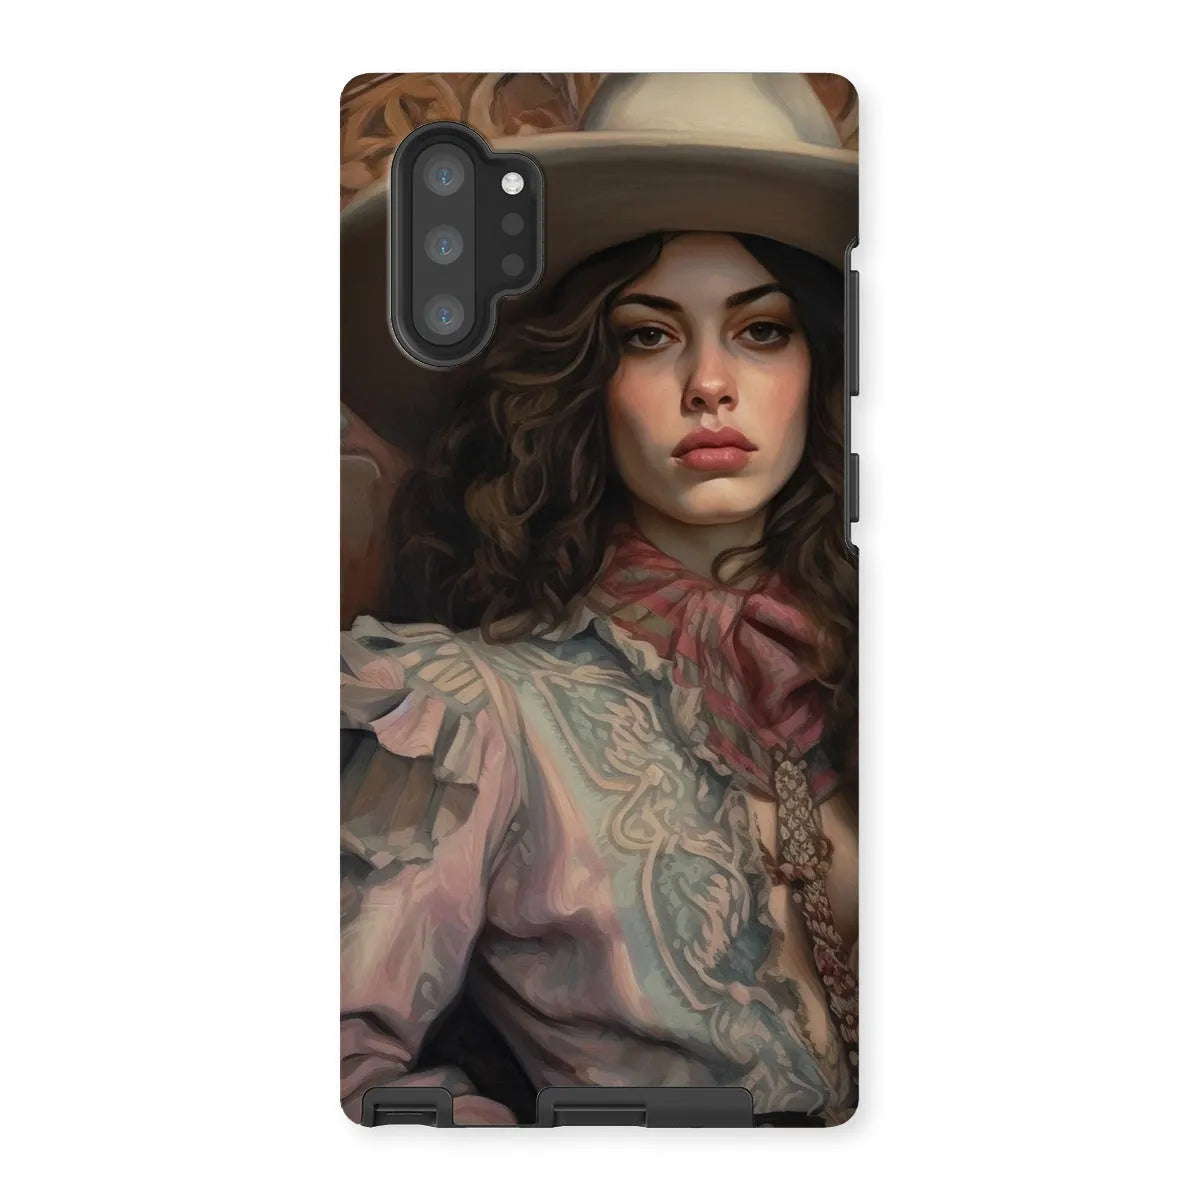 Alex The Lesbian Cowgirl - Sapphic Art Phone Case - Samsung Galaxy Note 10p / Matte - Mobile Phone Cases - Aesthetic Art